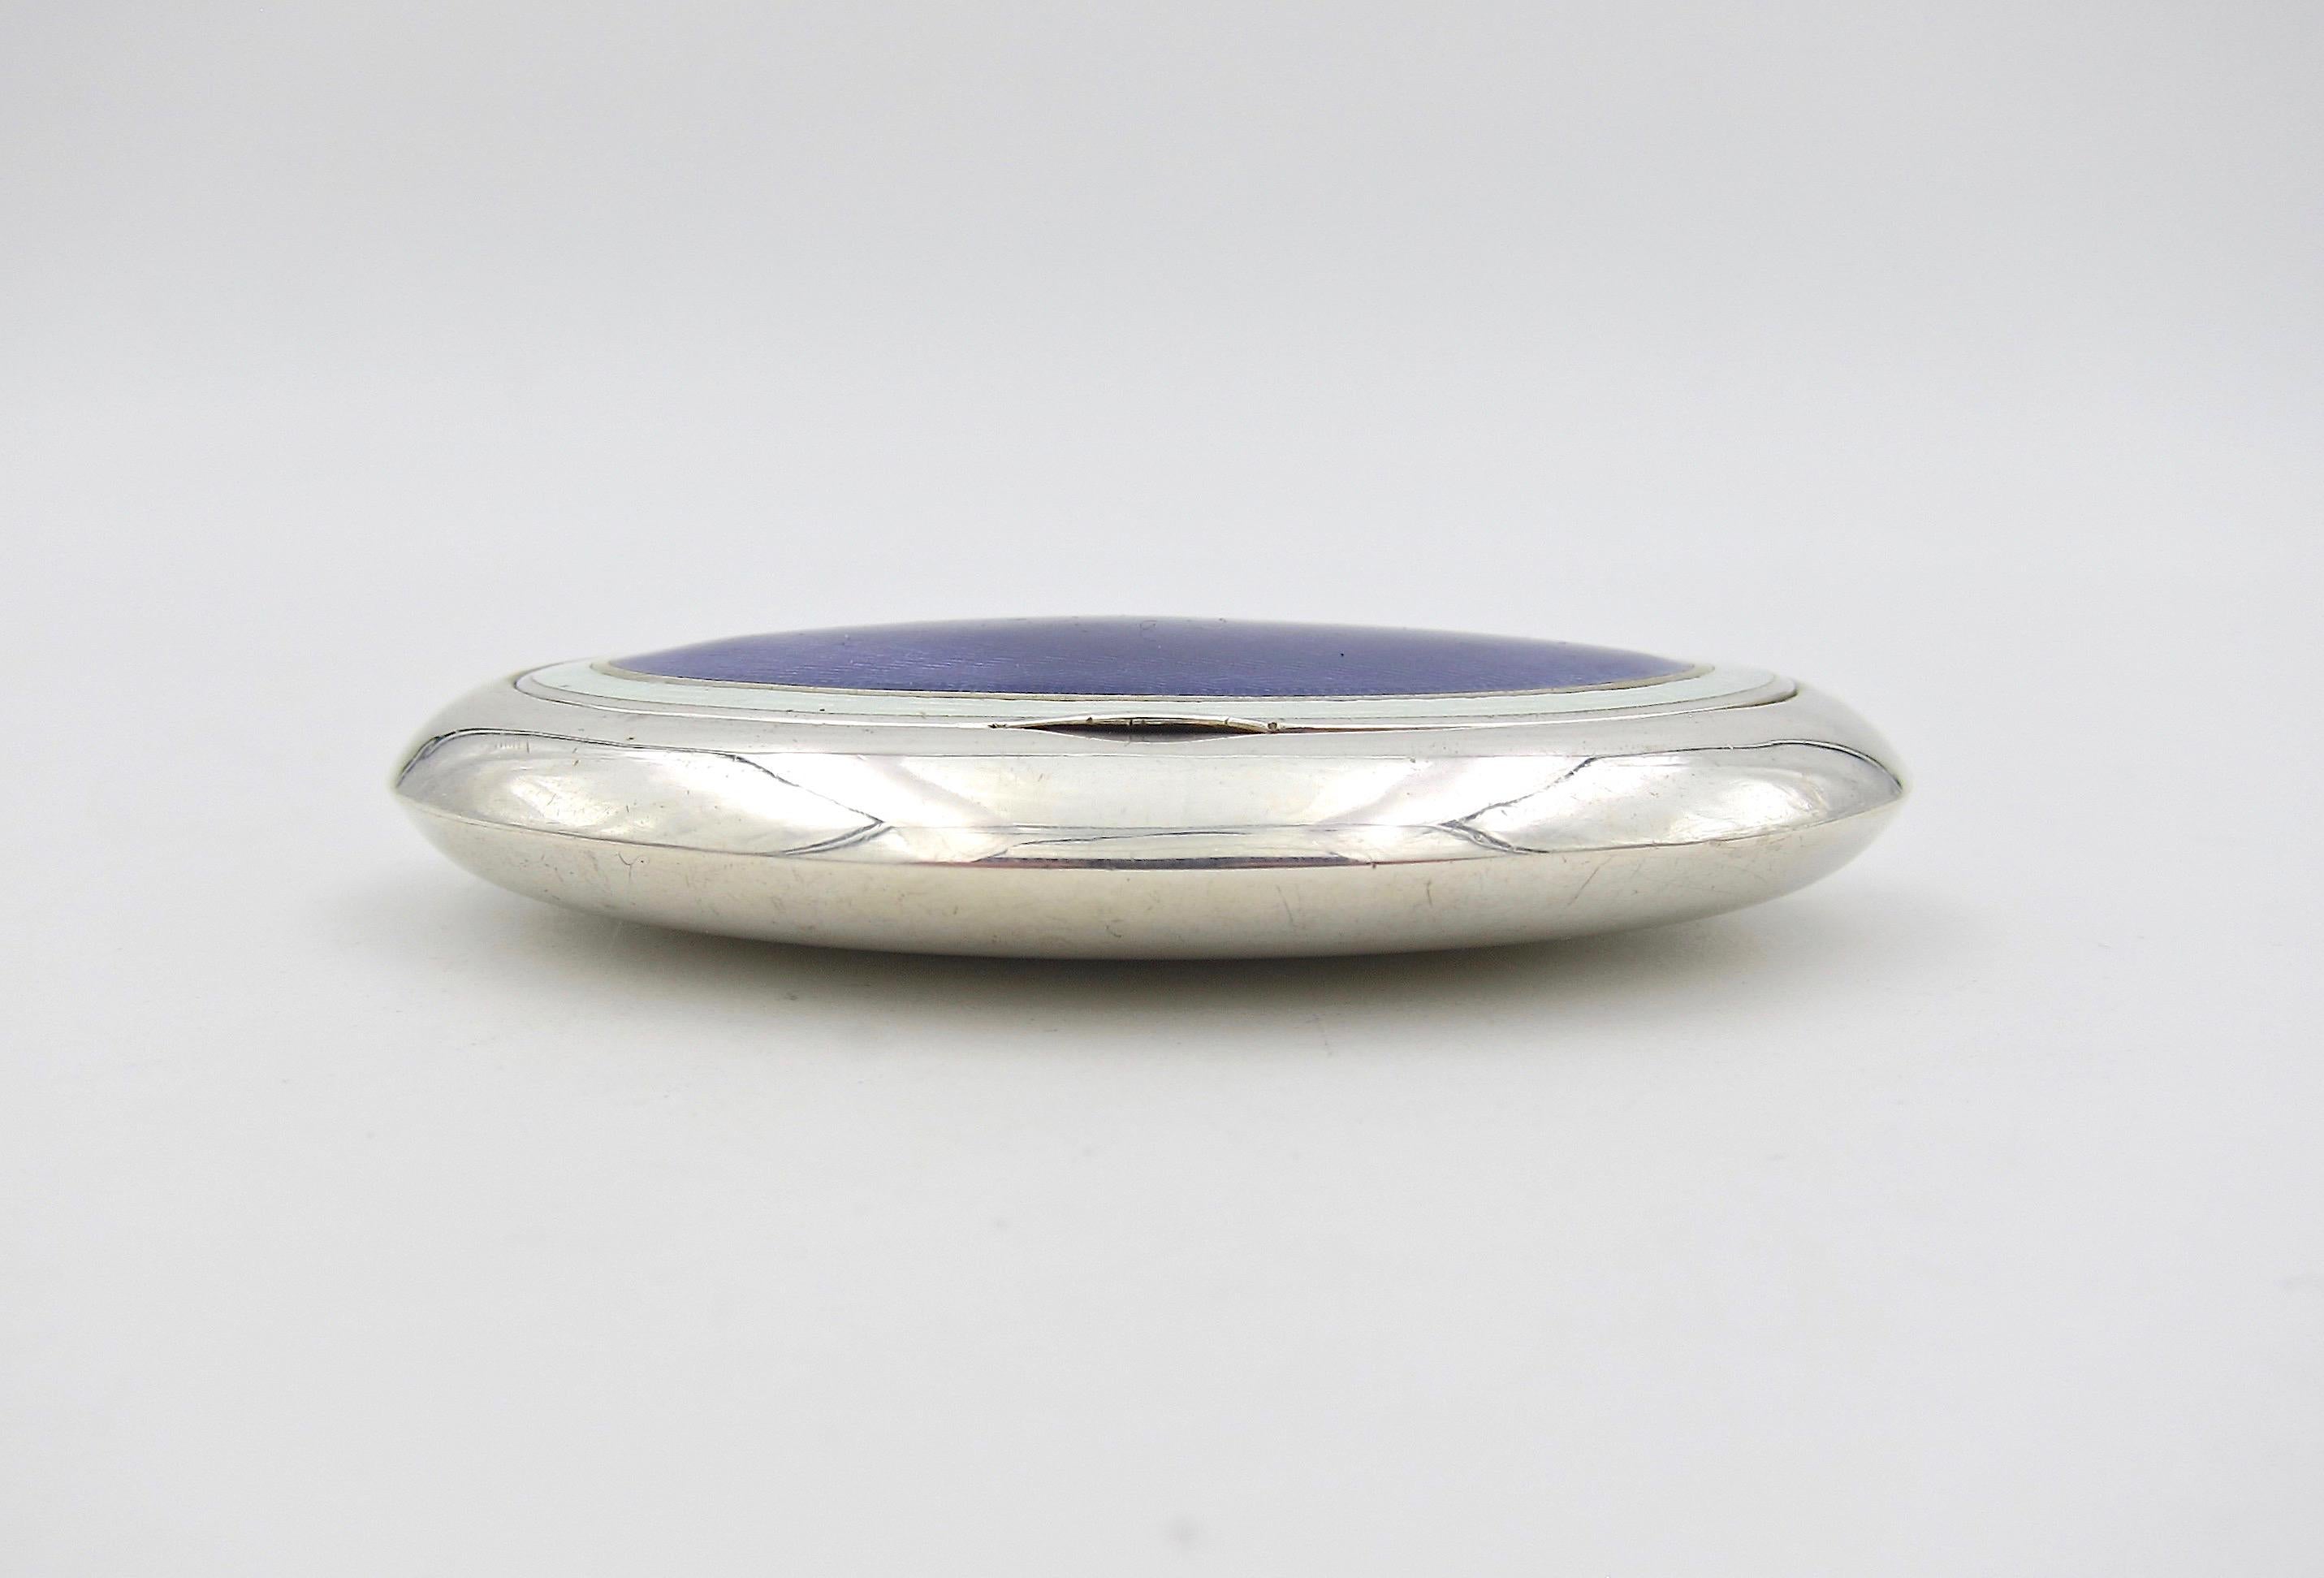 English Sterling Silver and Enamel Oval Box by Charles Edwin Turner, Birmingham, 1910